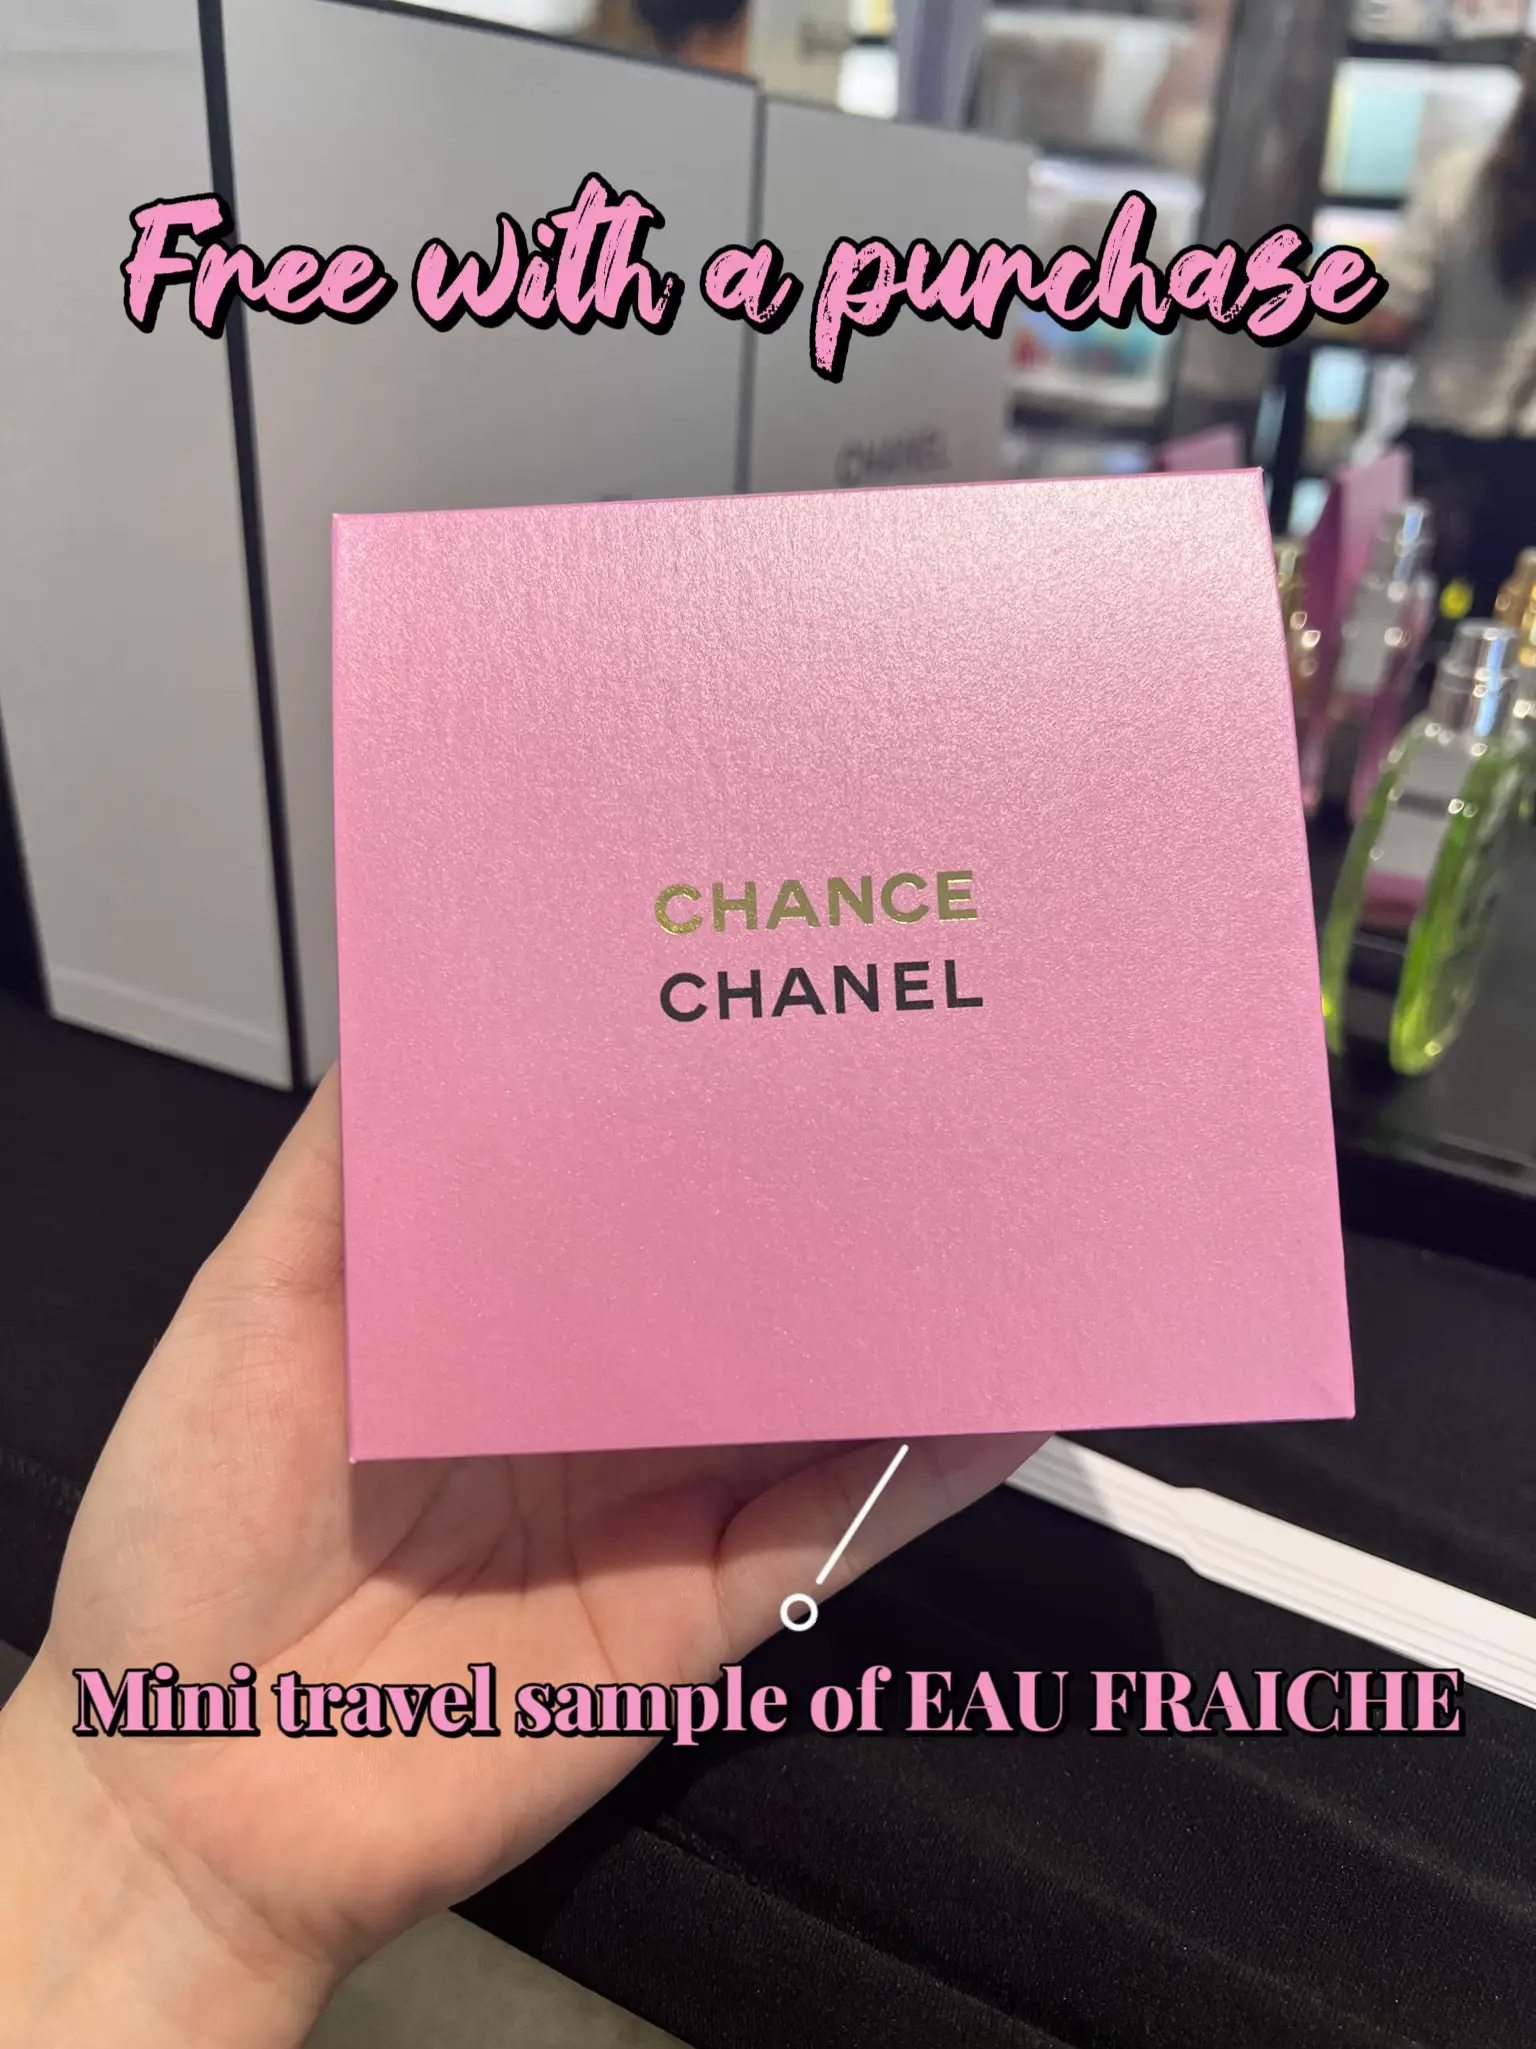 Chanel EAU FRAICHE, New Summer Scent, Gallery posted by Adriana